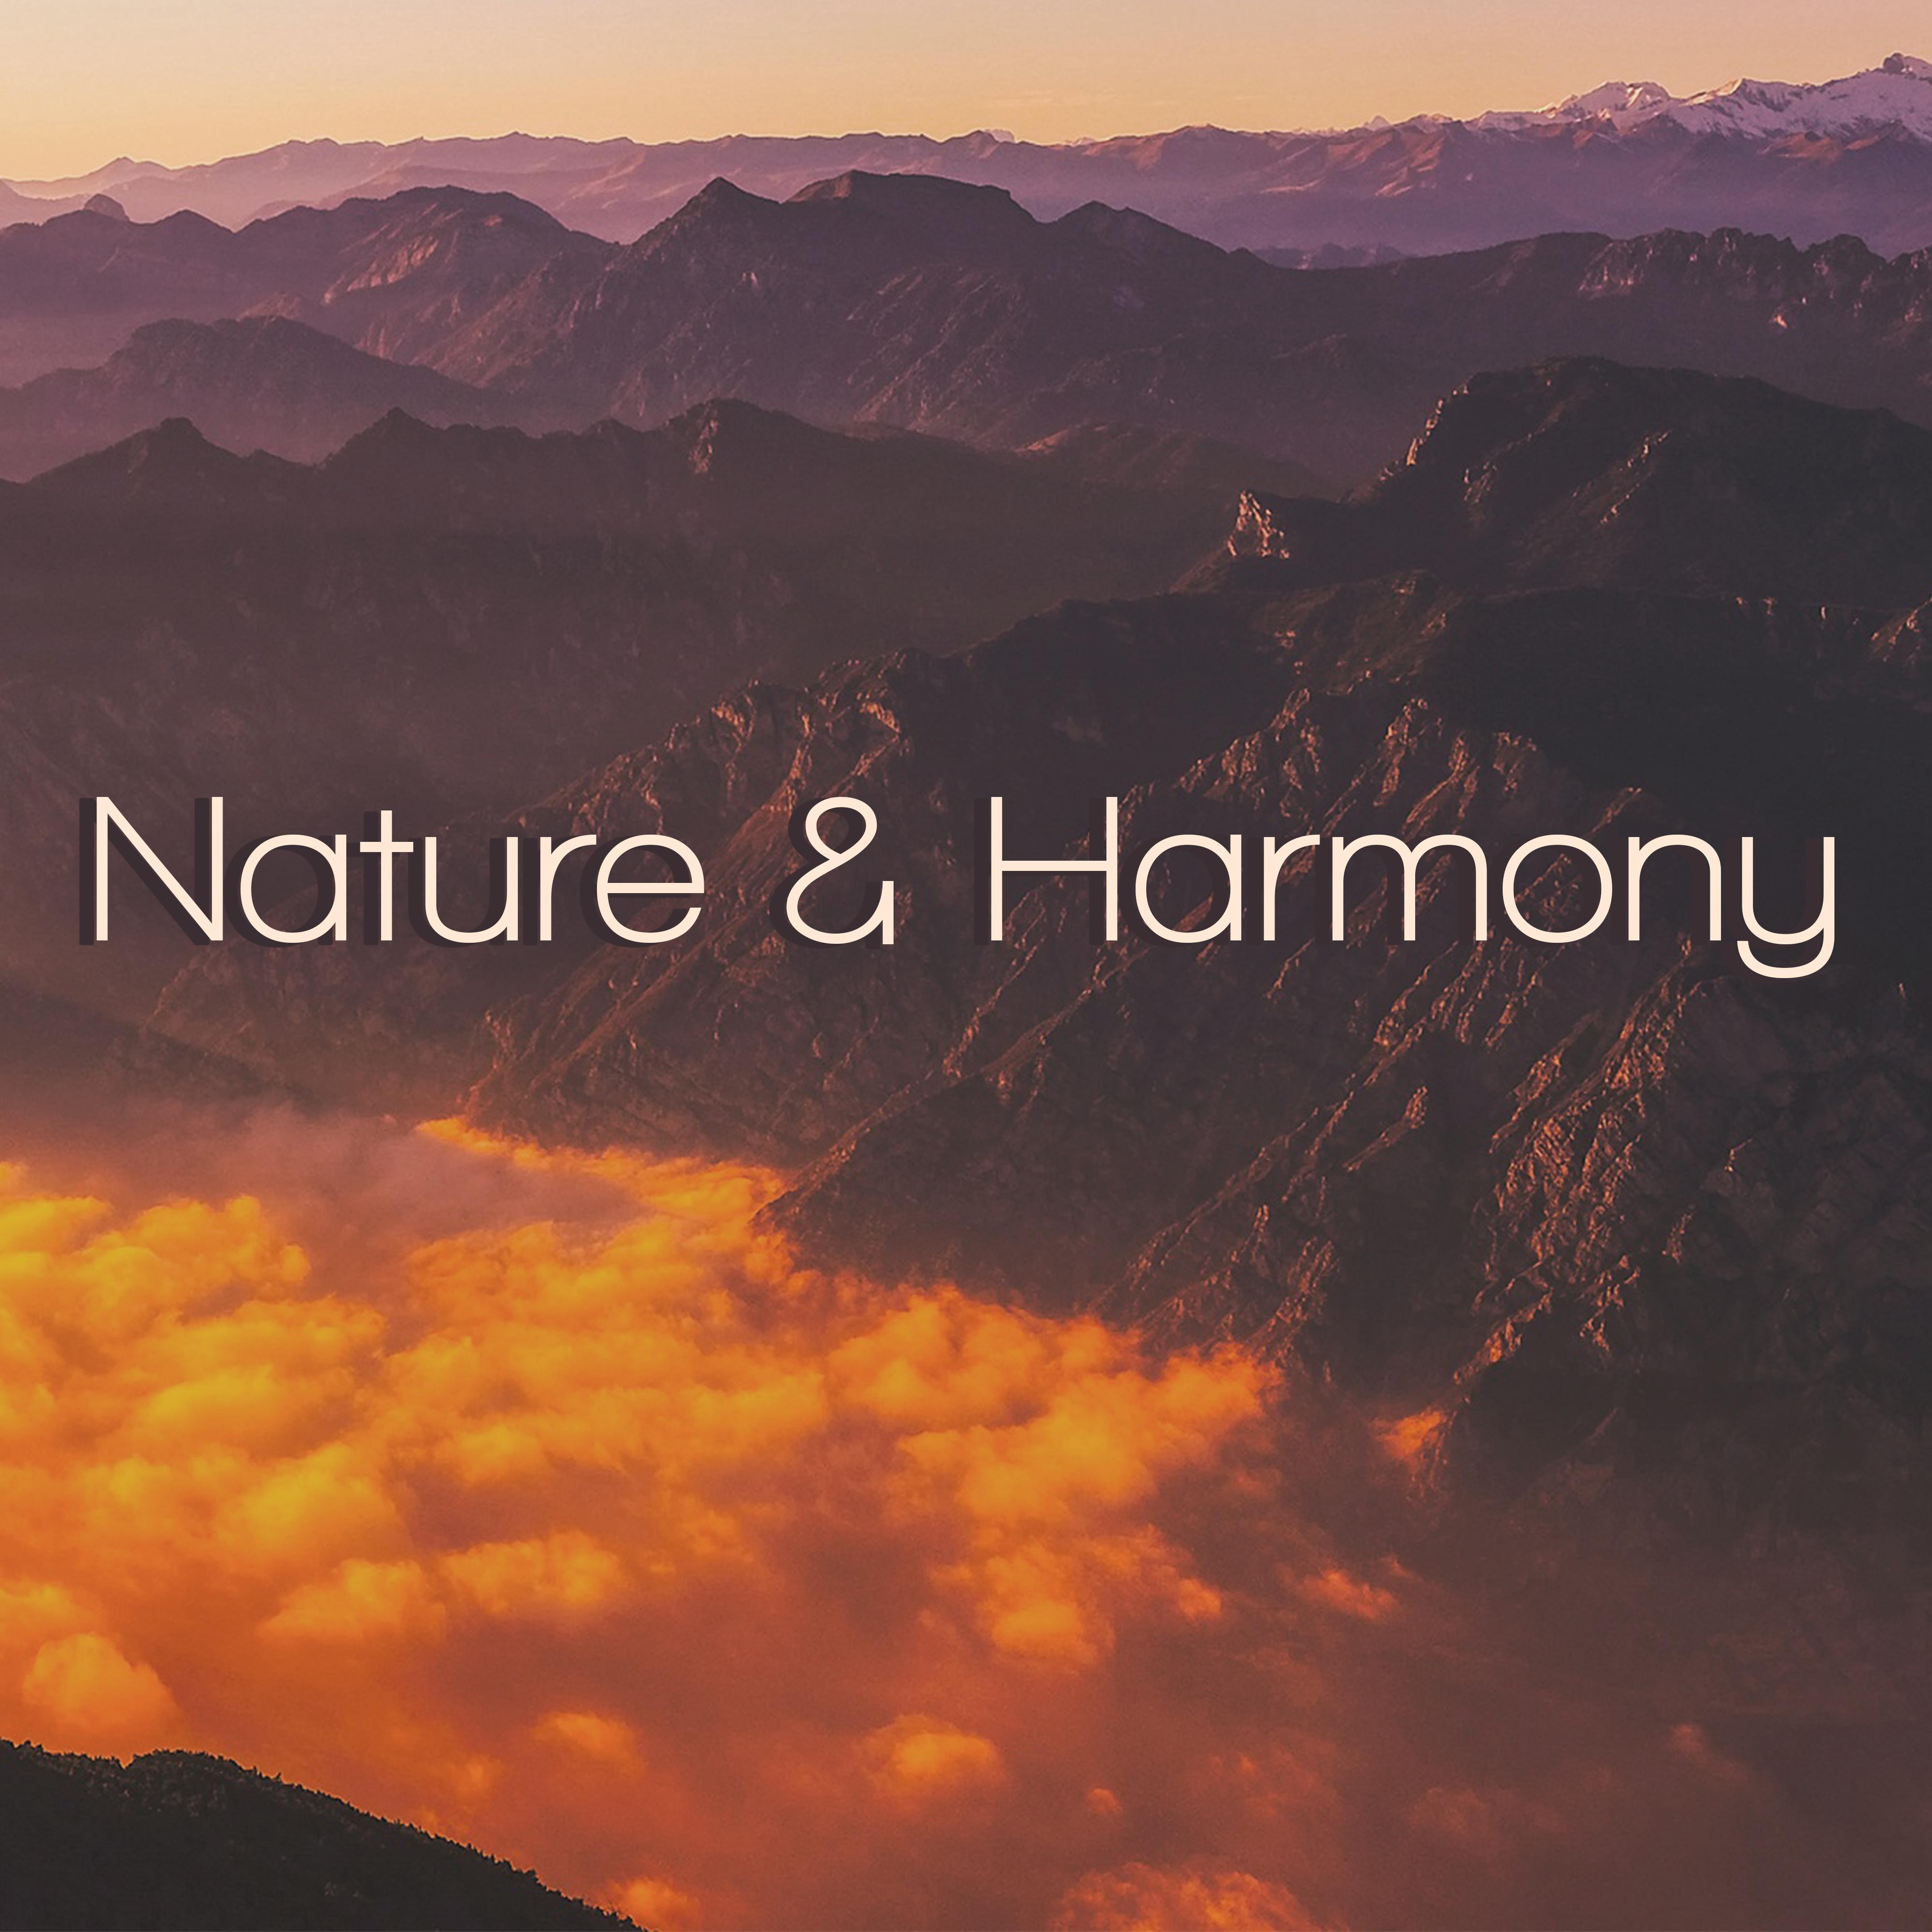 Nature  Harmony  Calmness, New Age Music, Peaceful Mind, Calming Music, Nature Sounds, Zen, Meditation